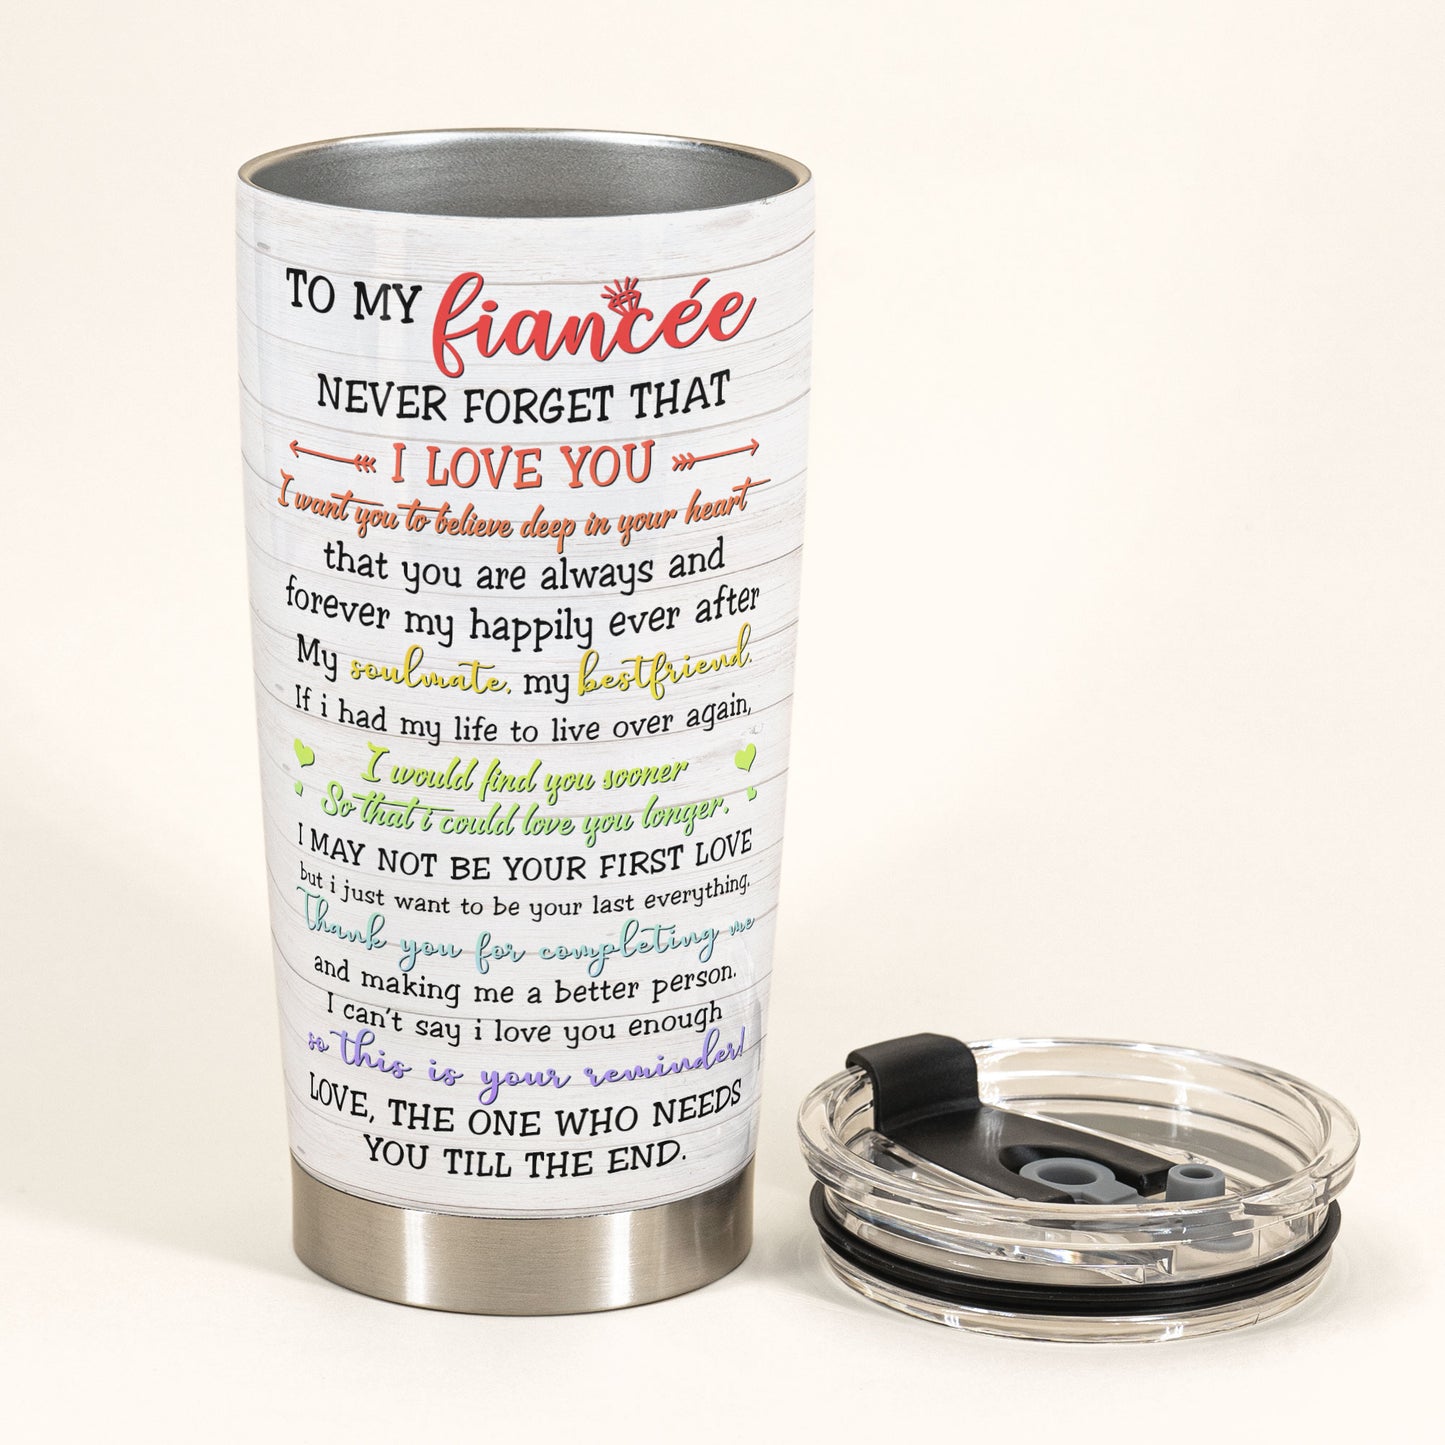 Love Is Love - Personalized Tumbler Cup - Anniversary Gift For Couple - Bride